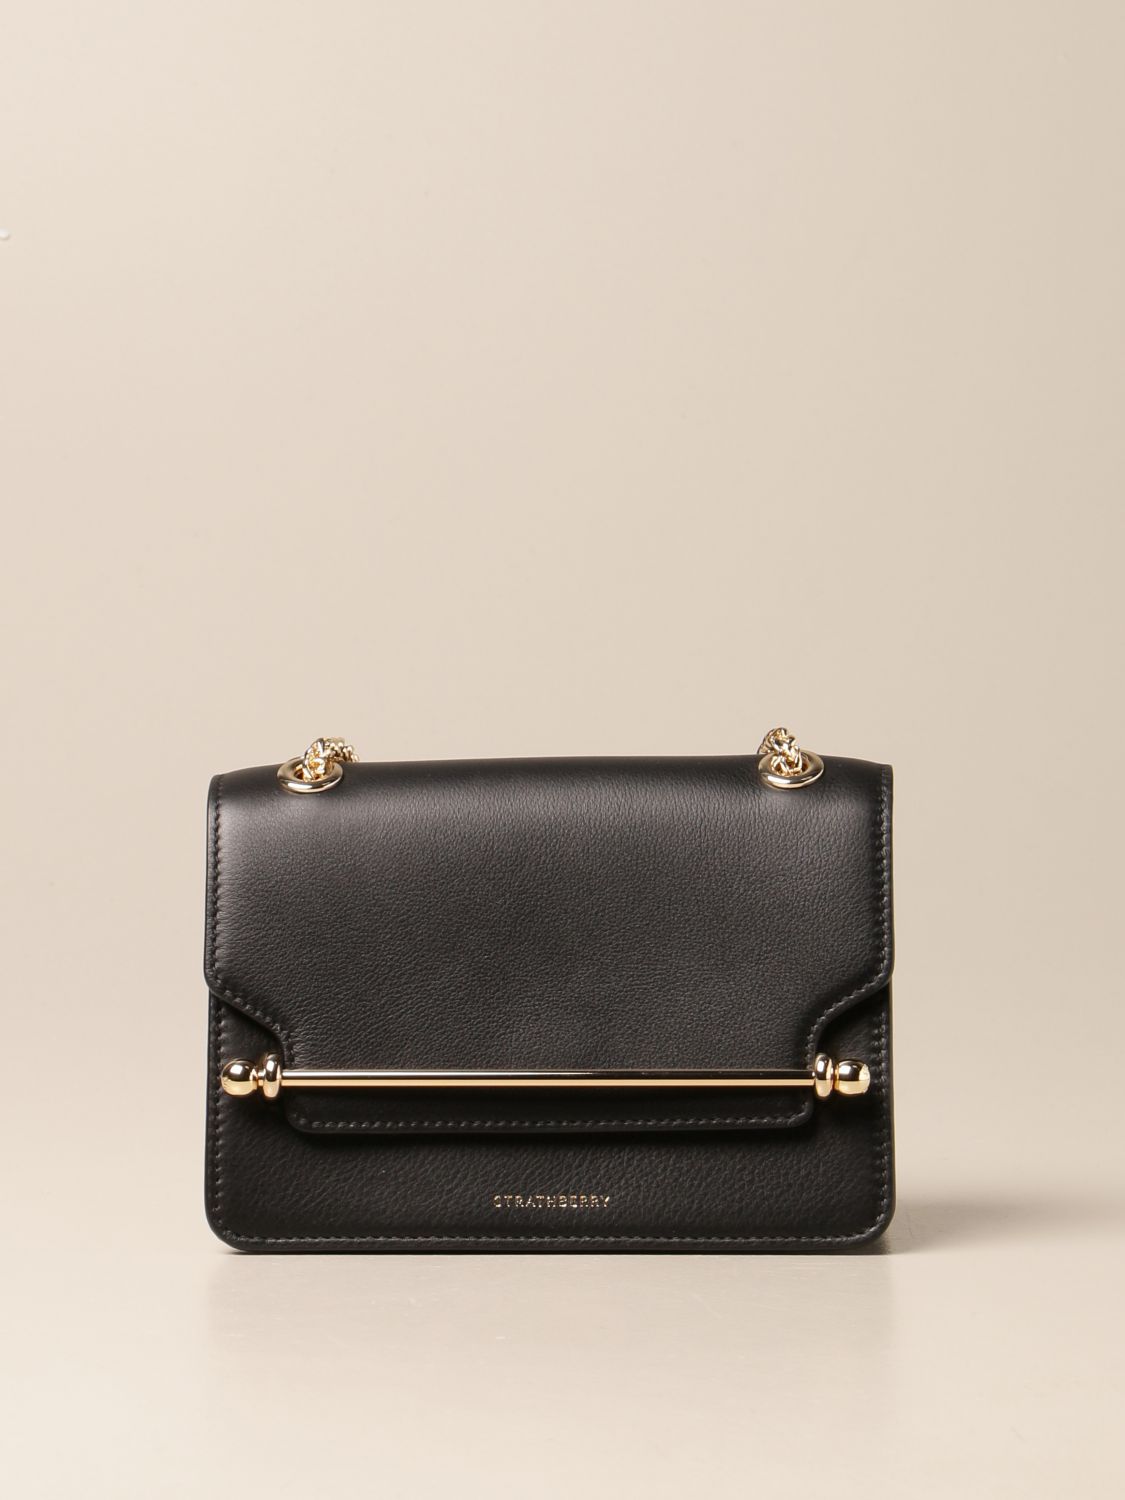 STRATHBERRY: East/west mini leather bag - Black  Strathberry mini bag EAST/WEST  MINI - W online at